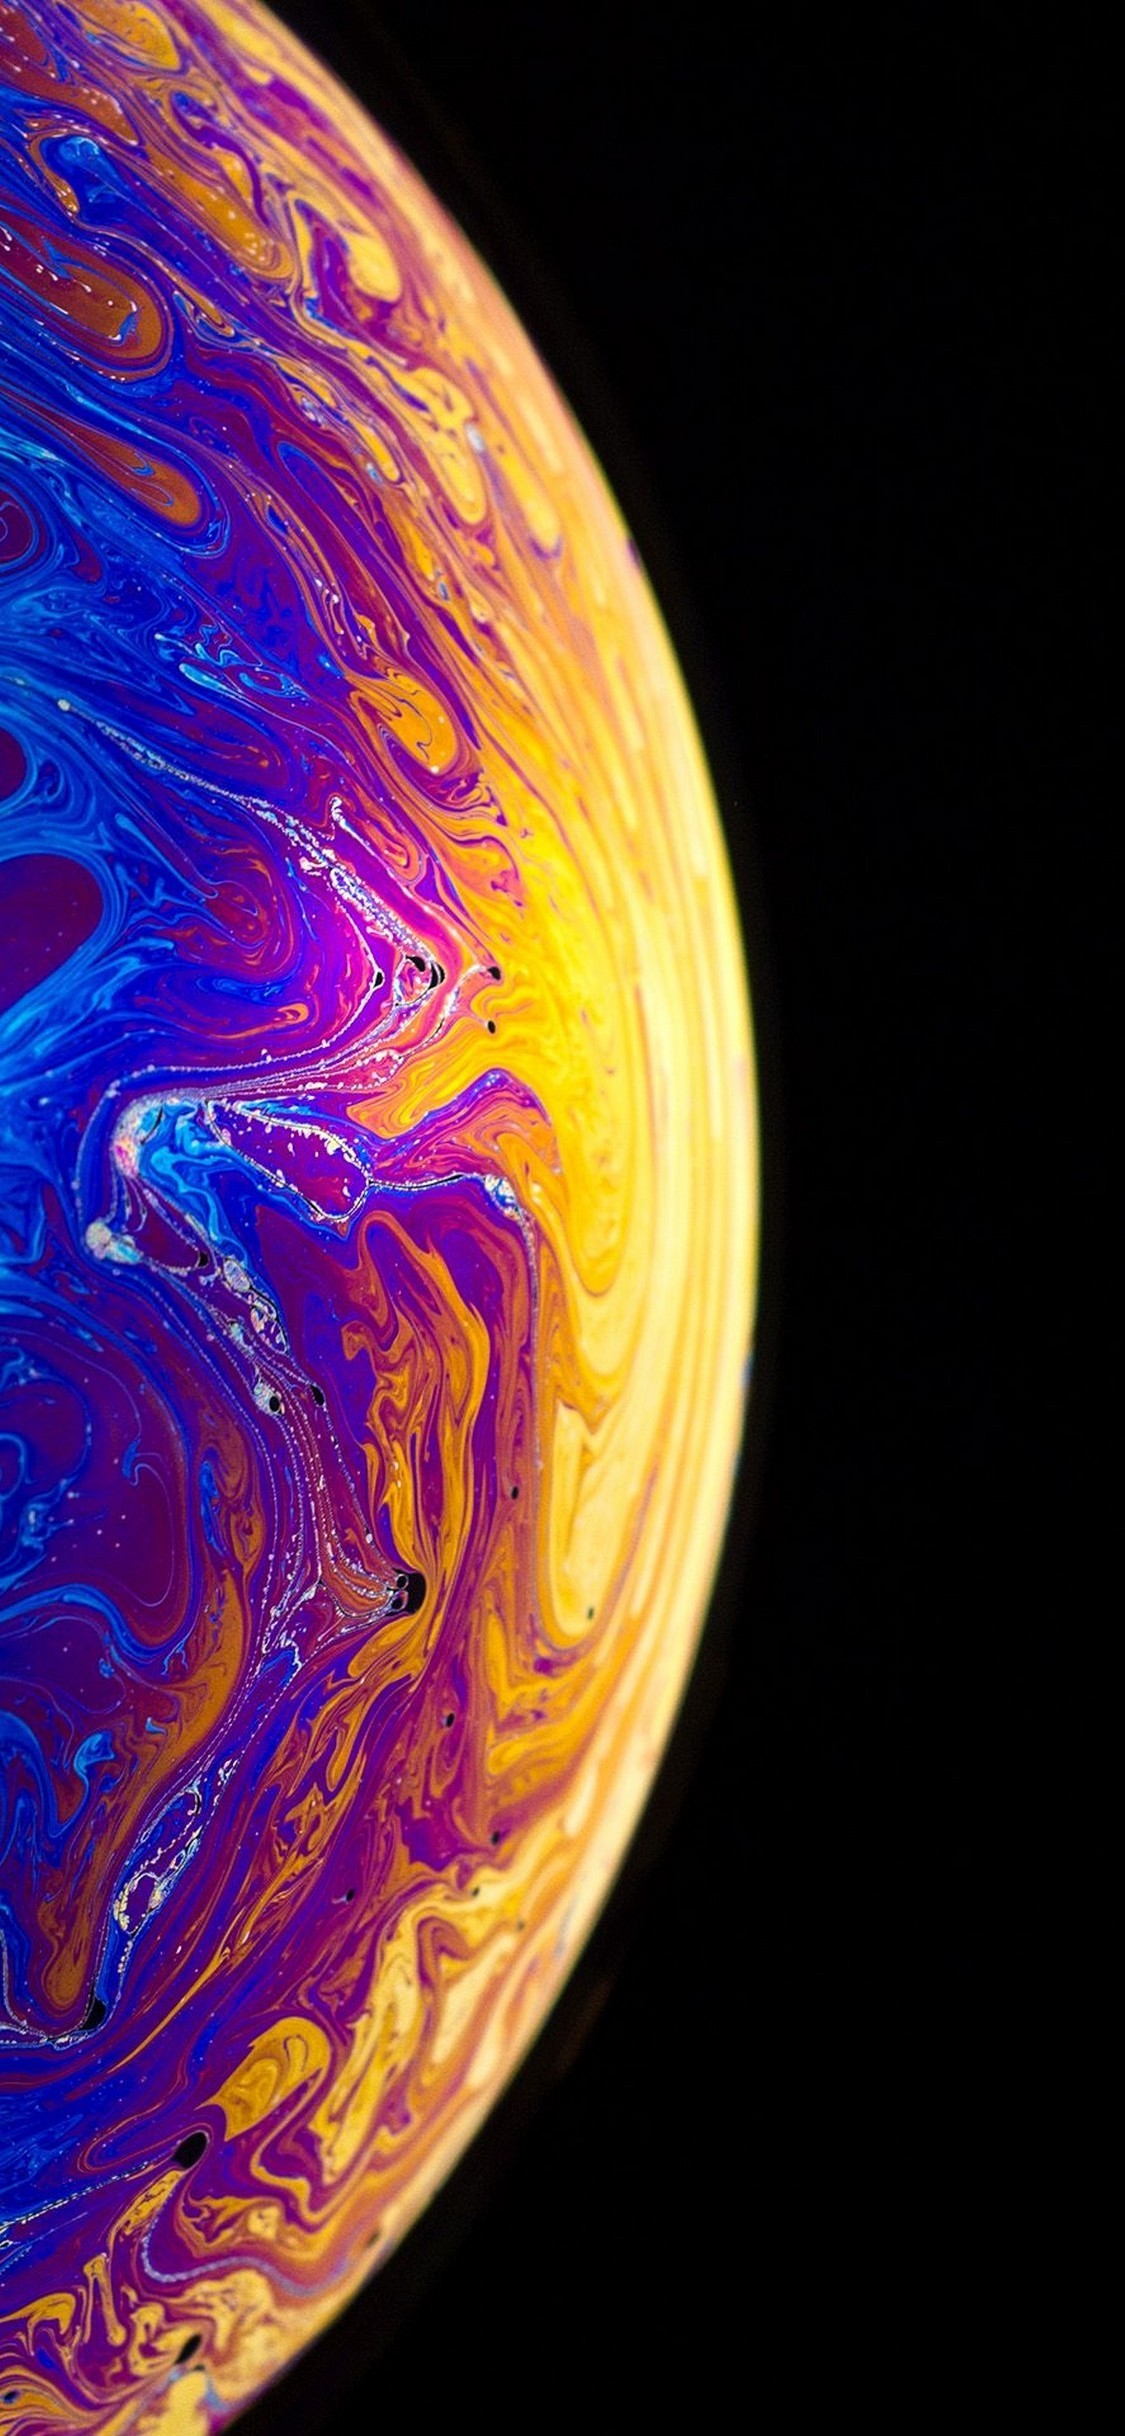 iPhone XS Screen Wallpaper with high-resolution 1125x2436 pixel. Download all Mobile Wallpapers and Use them as wallpapers for your iPhone, Tablet, iPad, Android and other mobile devices